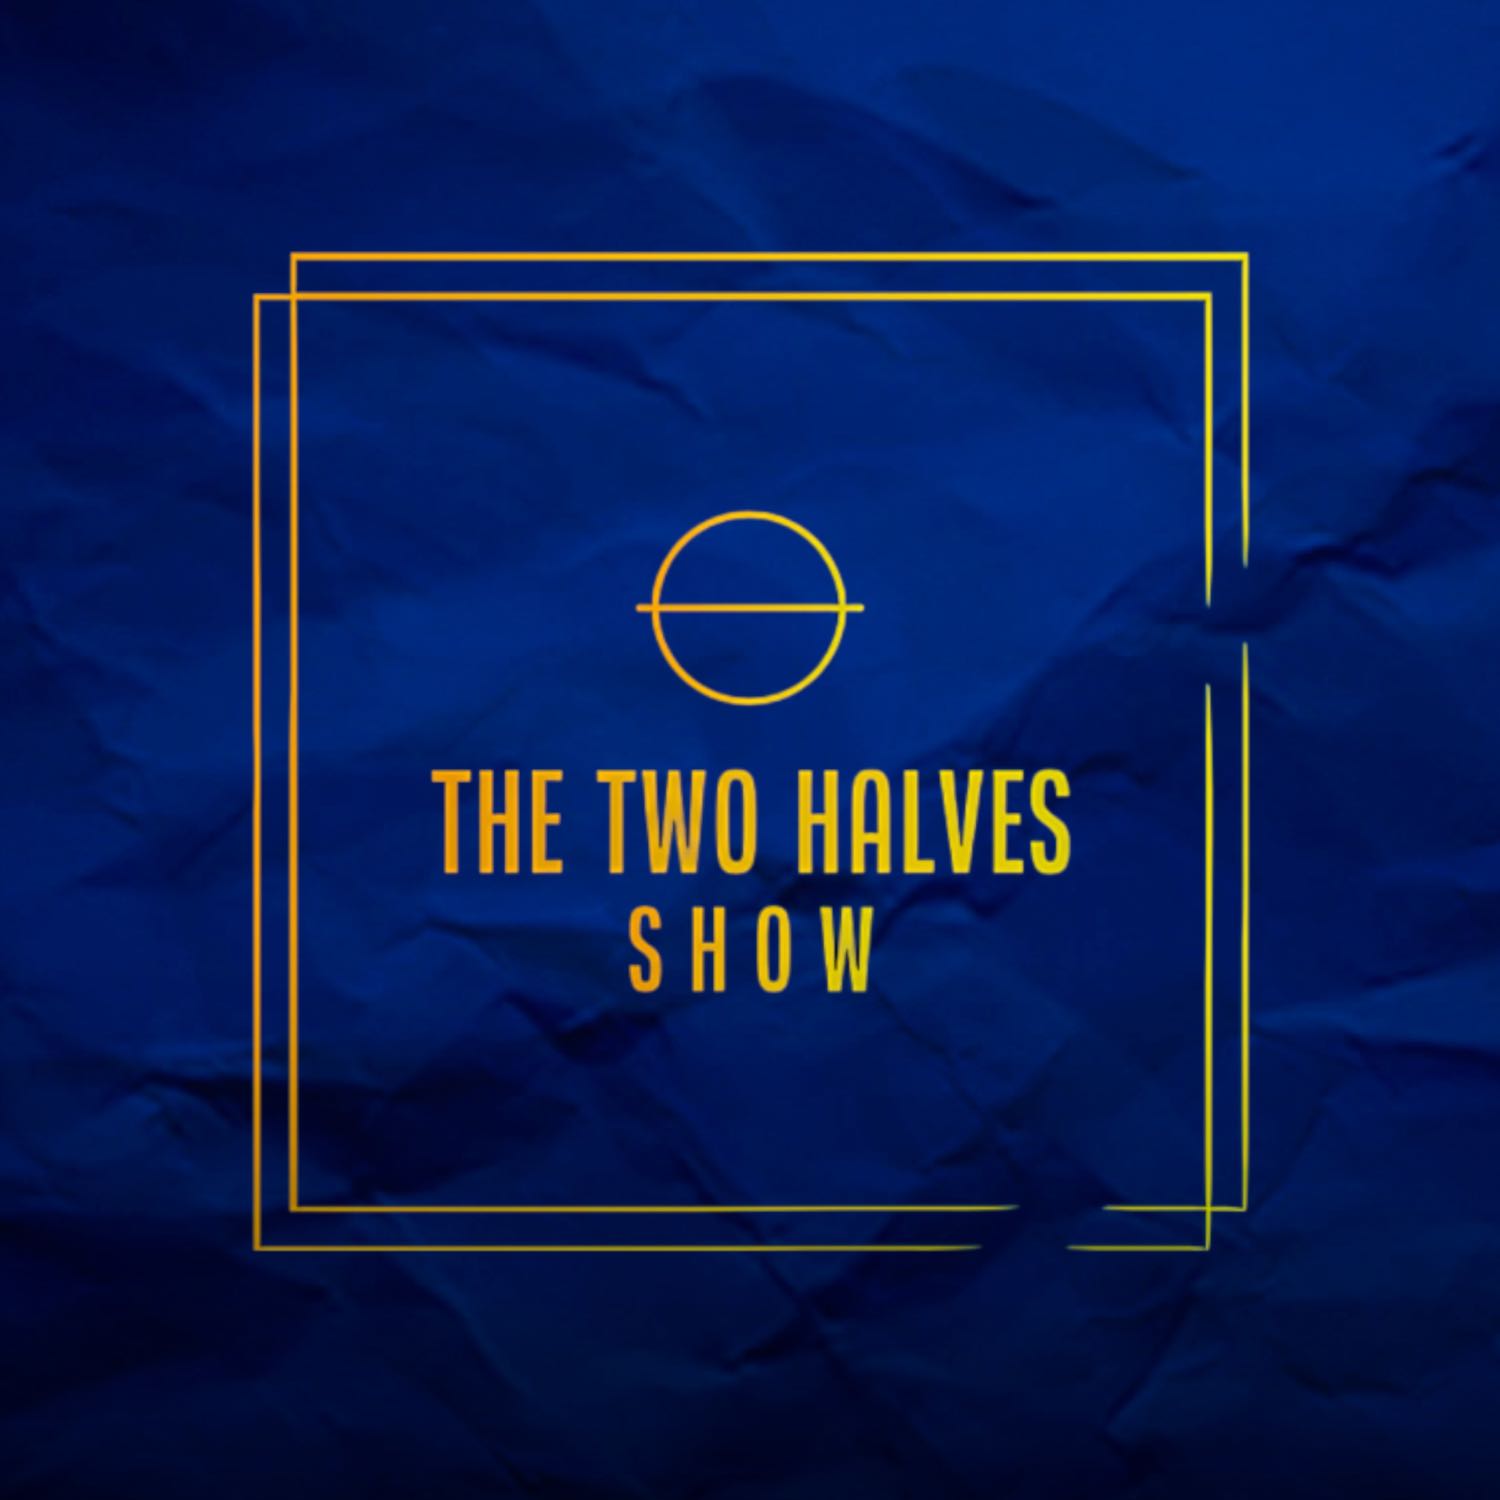 THE TWO HALVES SHOW - Arsenal Stay TOP | Team of the Season So far? | Lebron Carrying the Lakers!